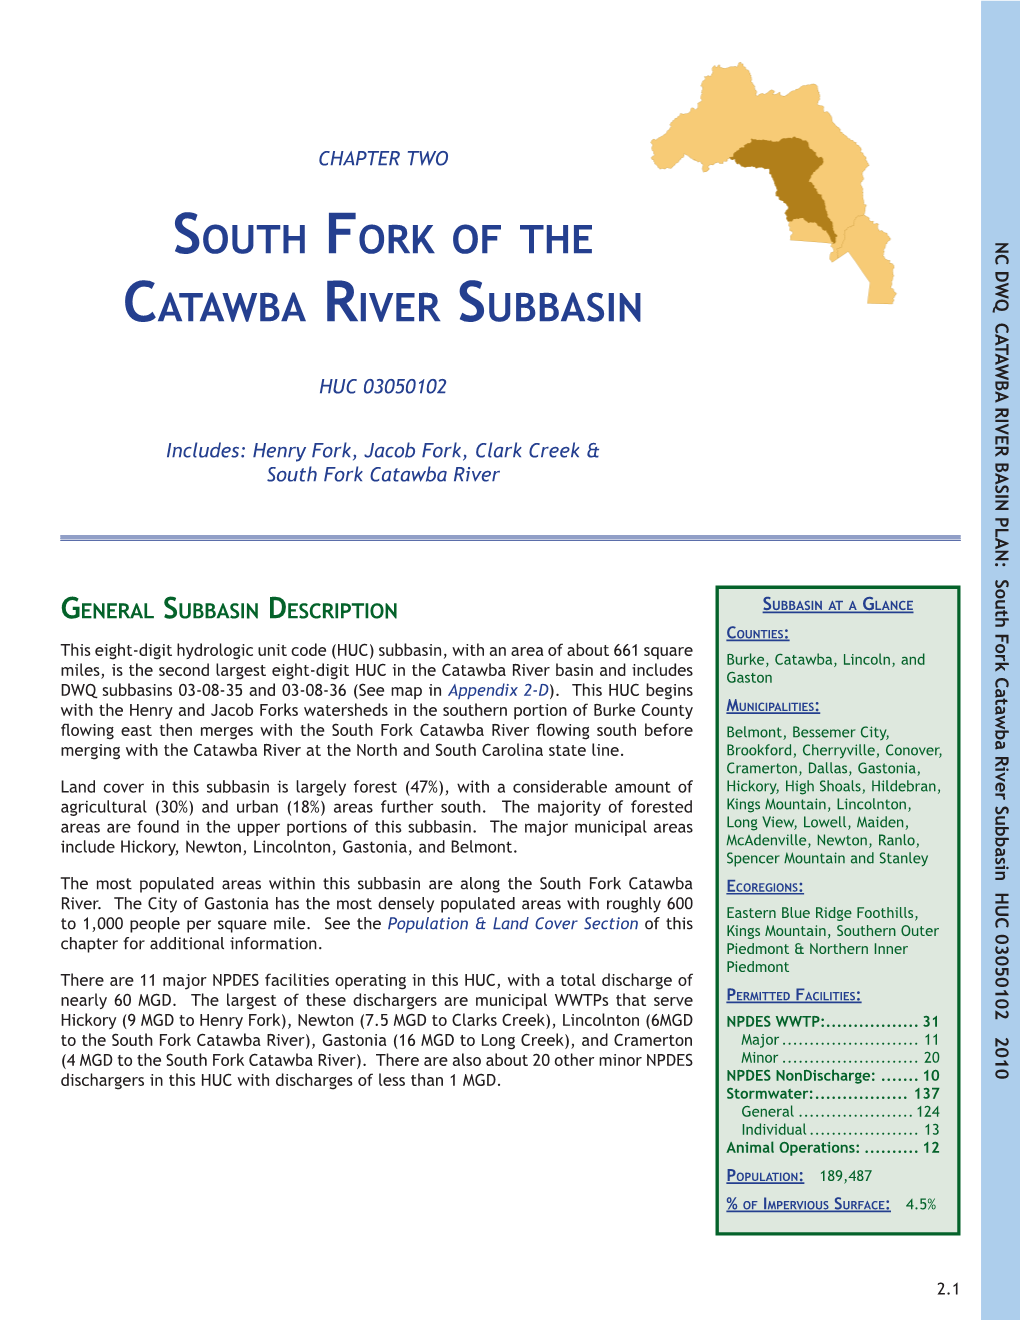 South Fork of the Catawba River Subbasin Is Just Under 50% Forested Land